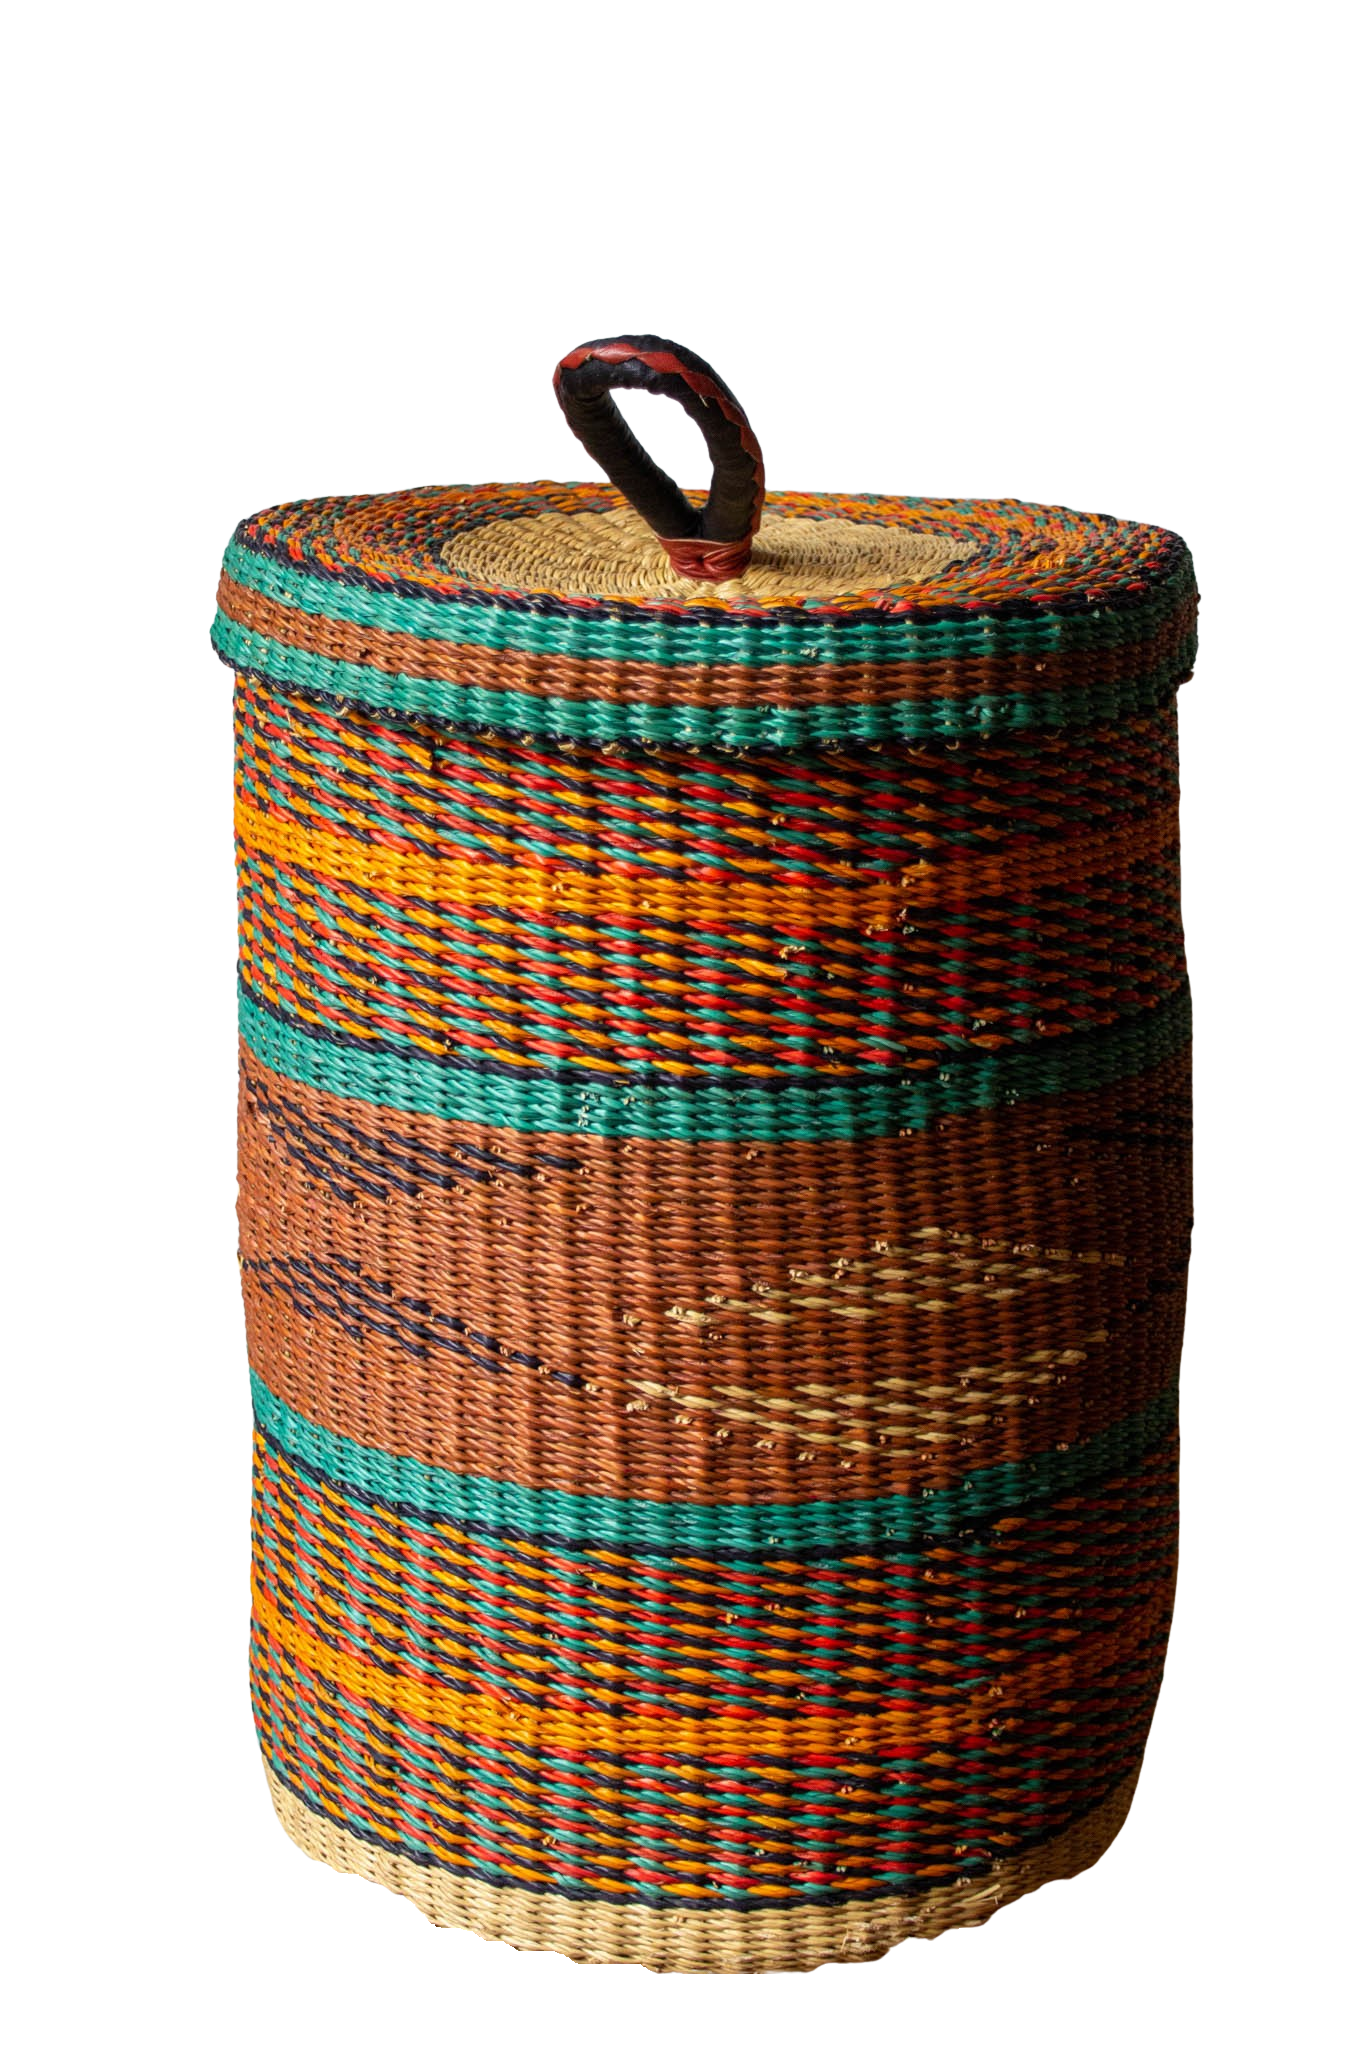 Laundry basket with brown and turquoise lid made of natural fiber 